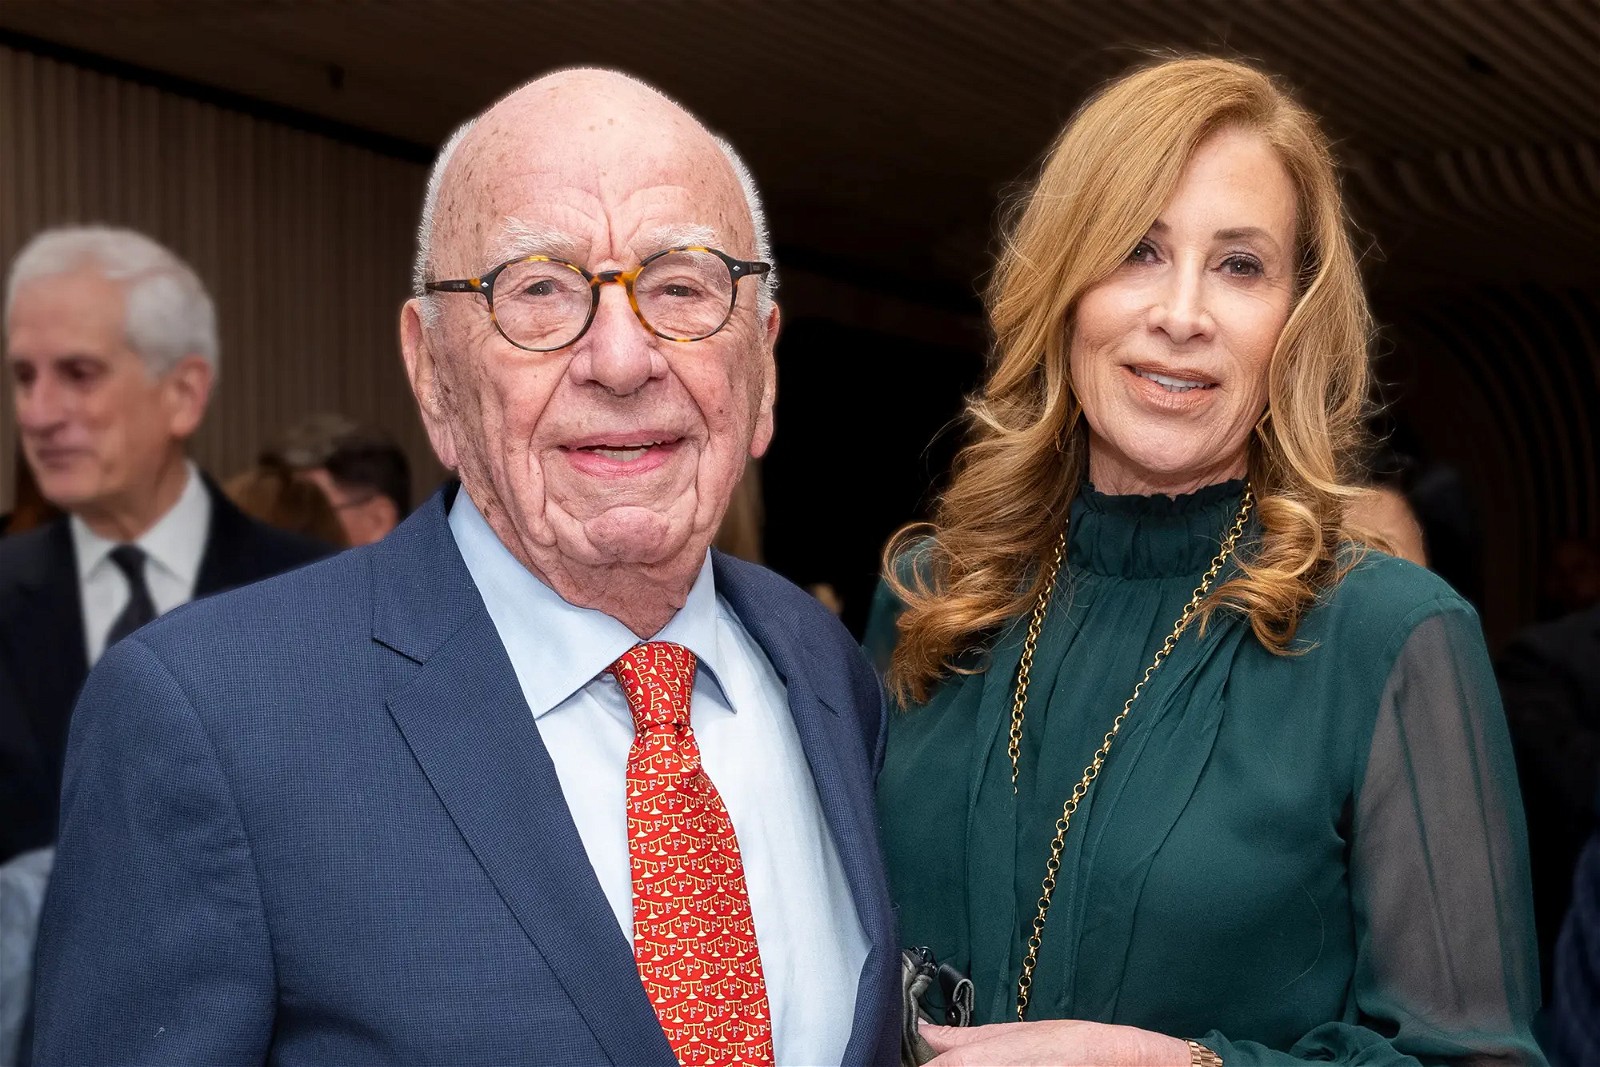 Rupert Murdoch and Ann Lesley Smith set to tie the knot